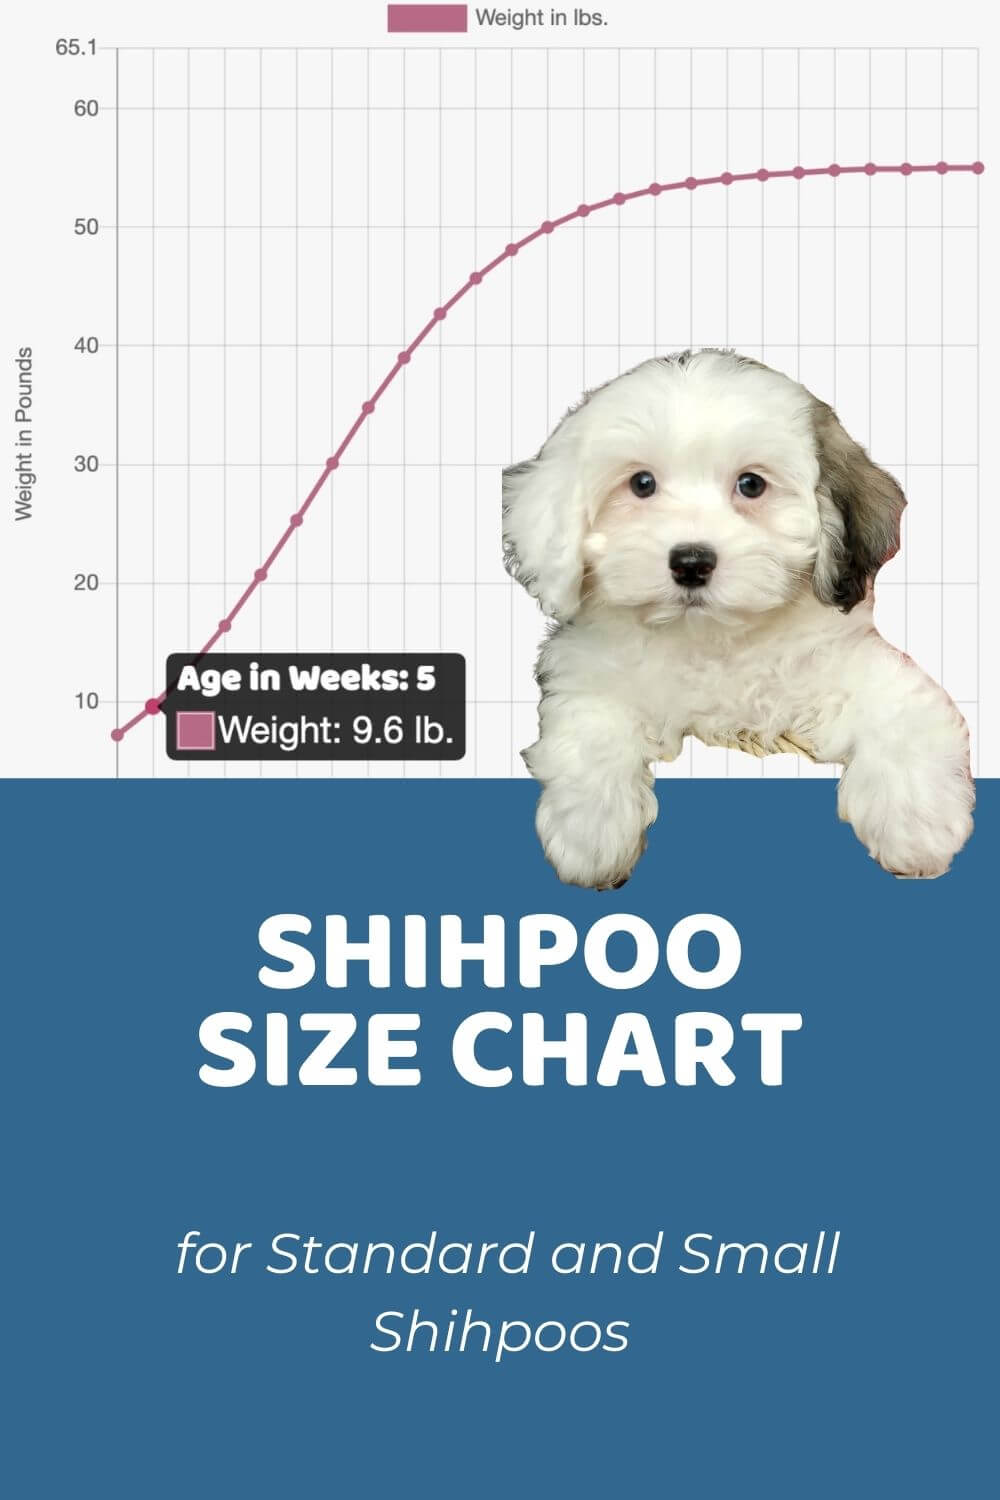 Shihpoo Size Chart for Small and Standard Shihpoos